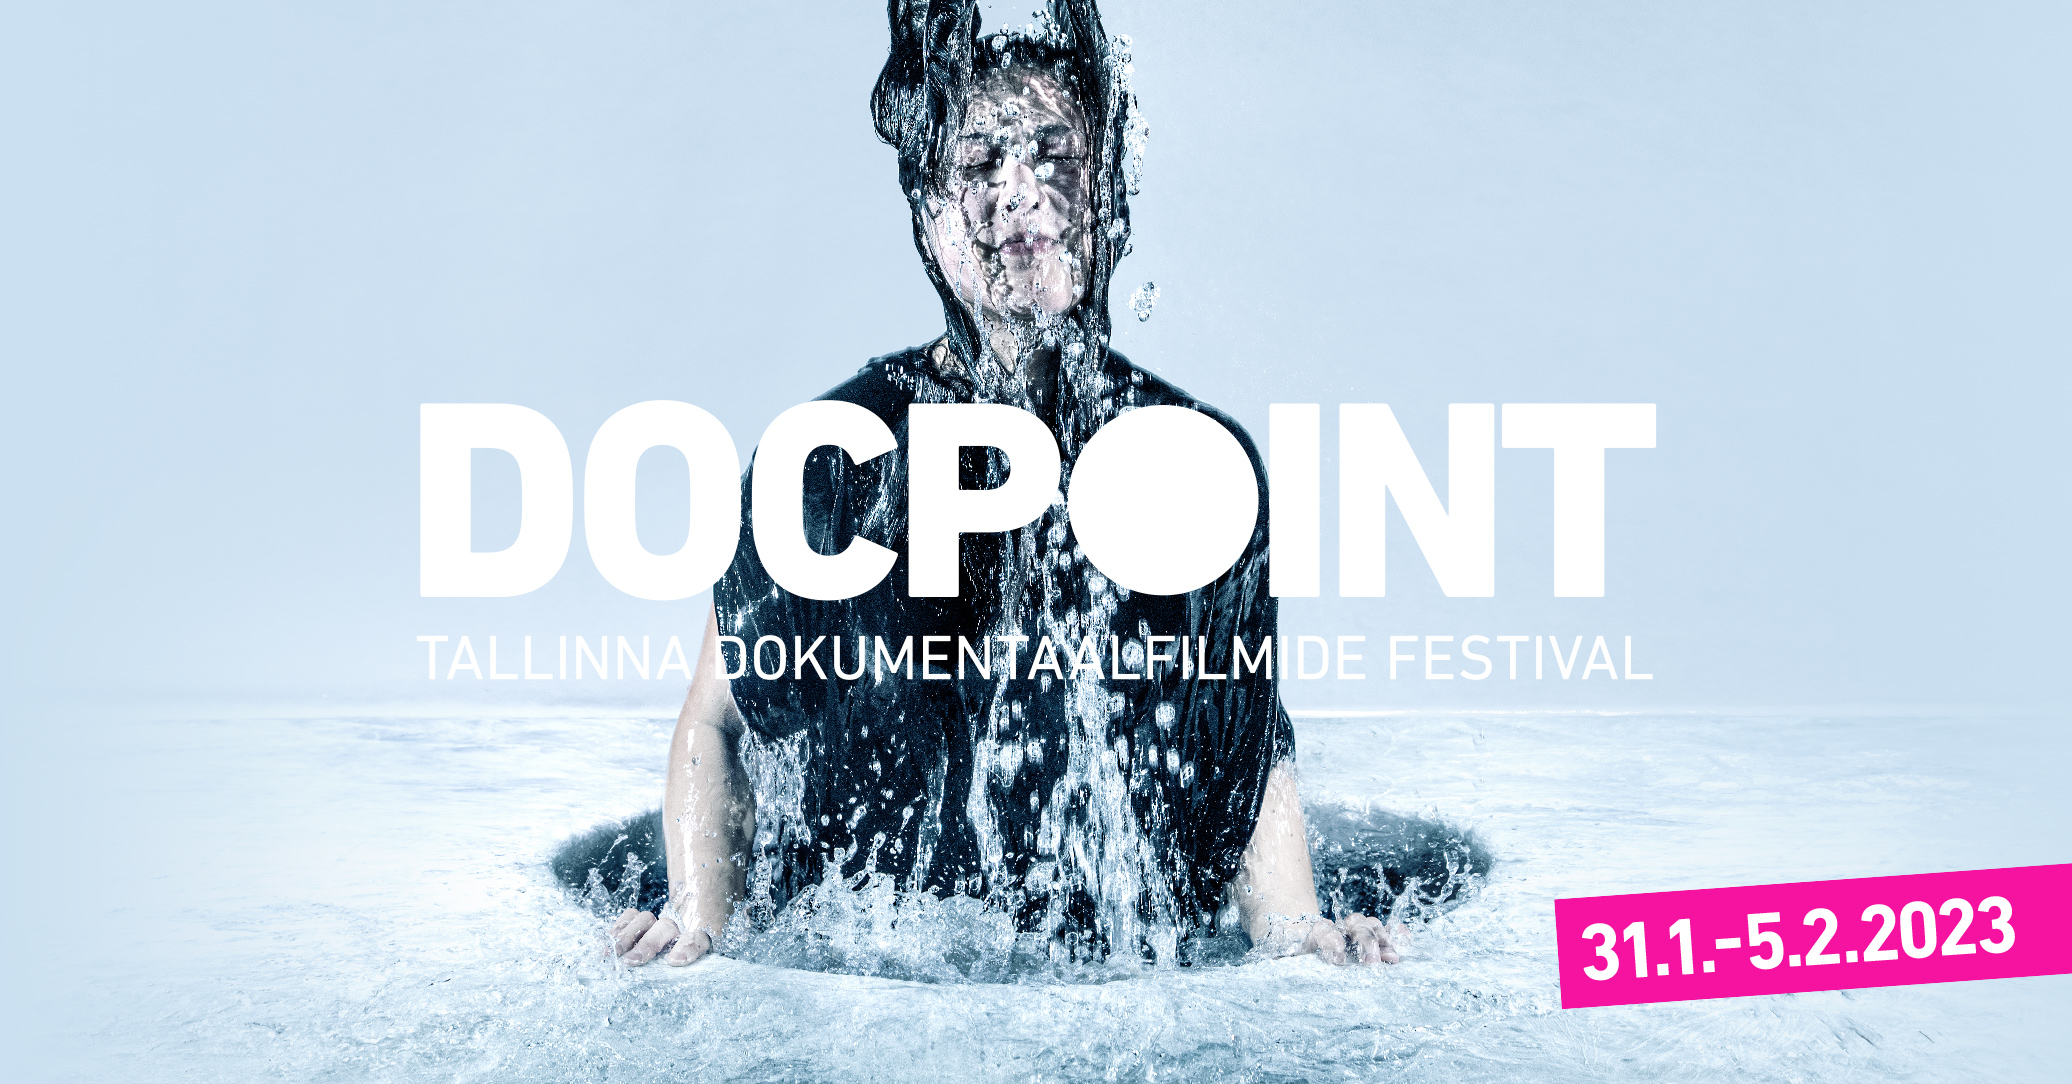 Front Page - Docpoint Tallinn 2023